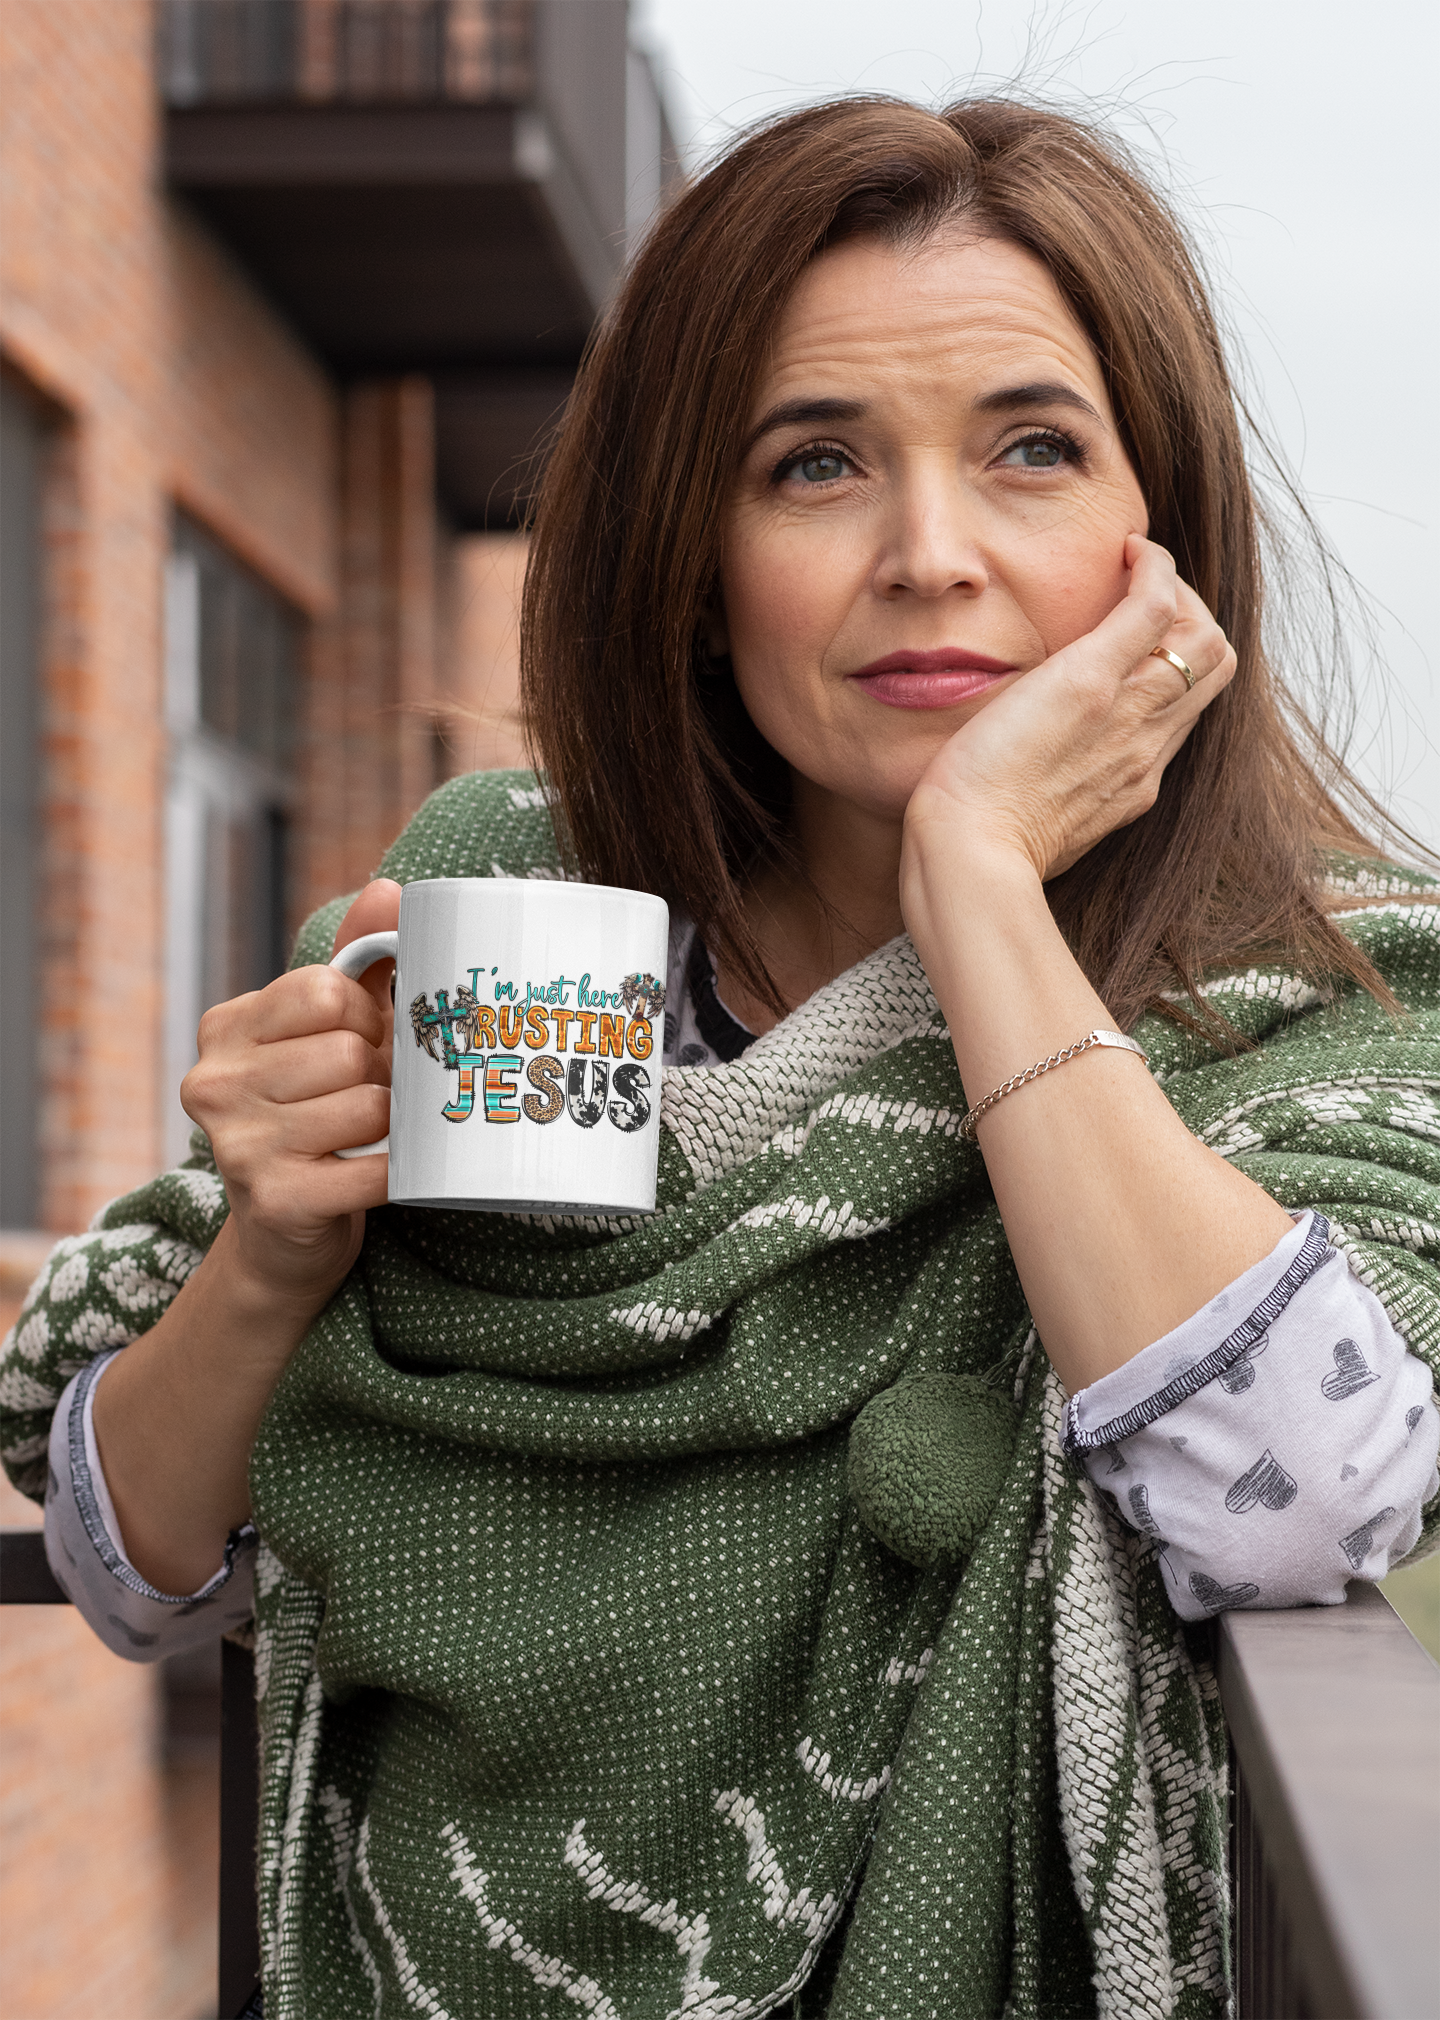 Humorous Conversation Starter at Bible Study. Embrace Faith and Trust in Jesus with Our 'I'm Just Here Trusting Jesus' Insulated Coffee Mug - 10oz: Start Your Day with Inspiration and Warmth